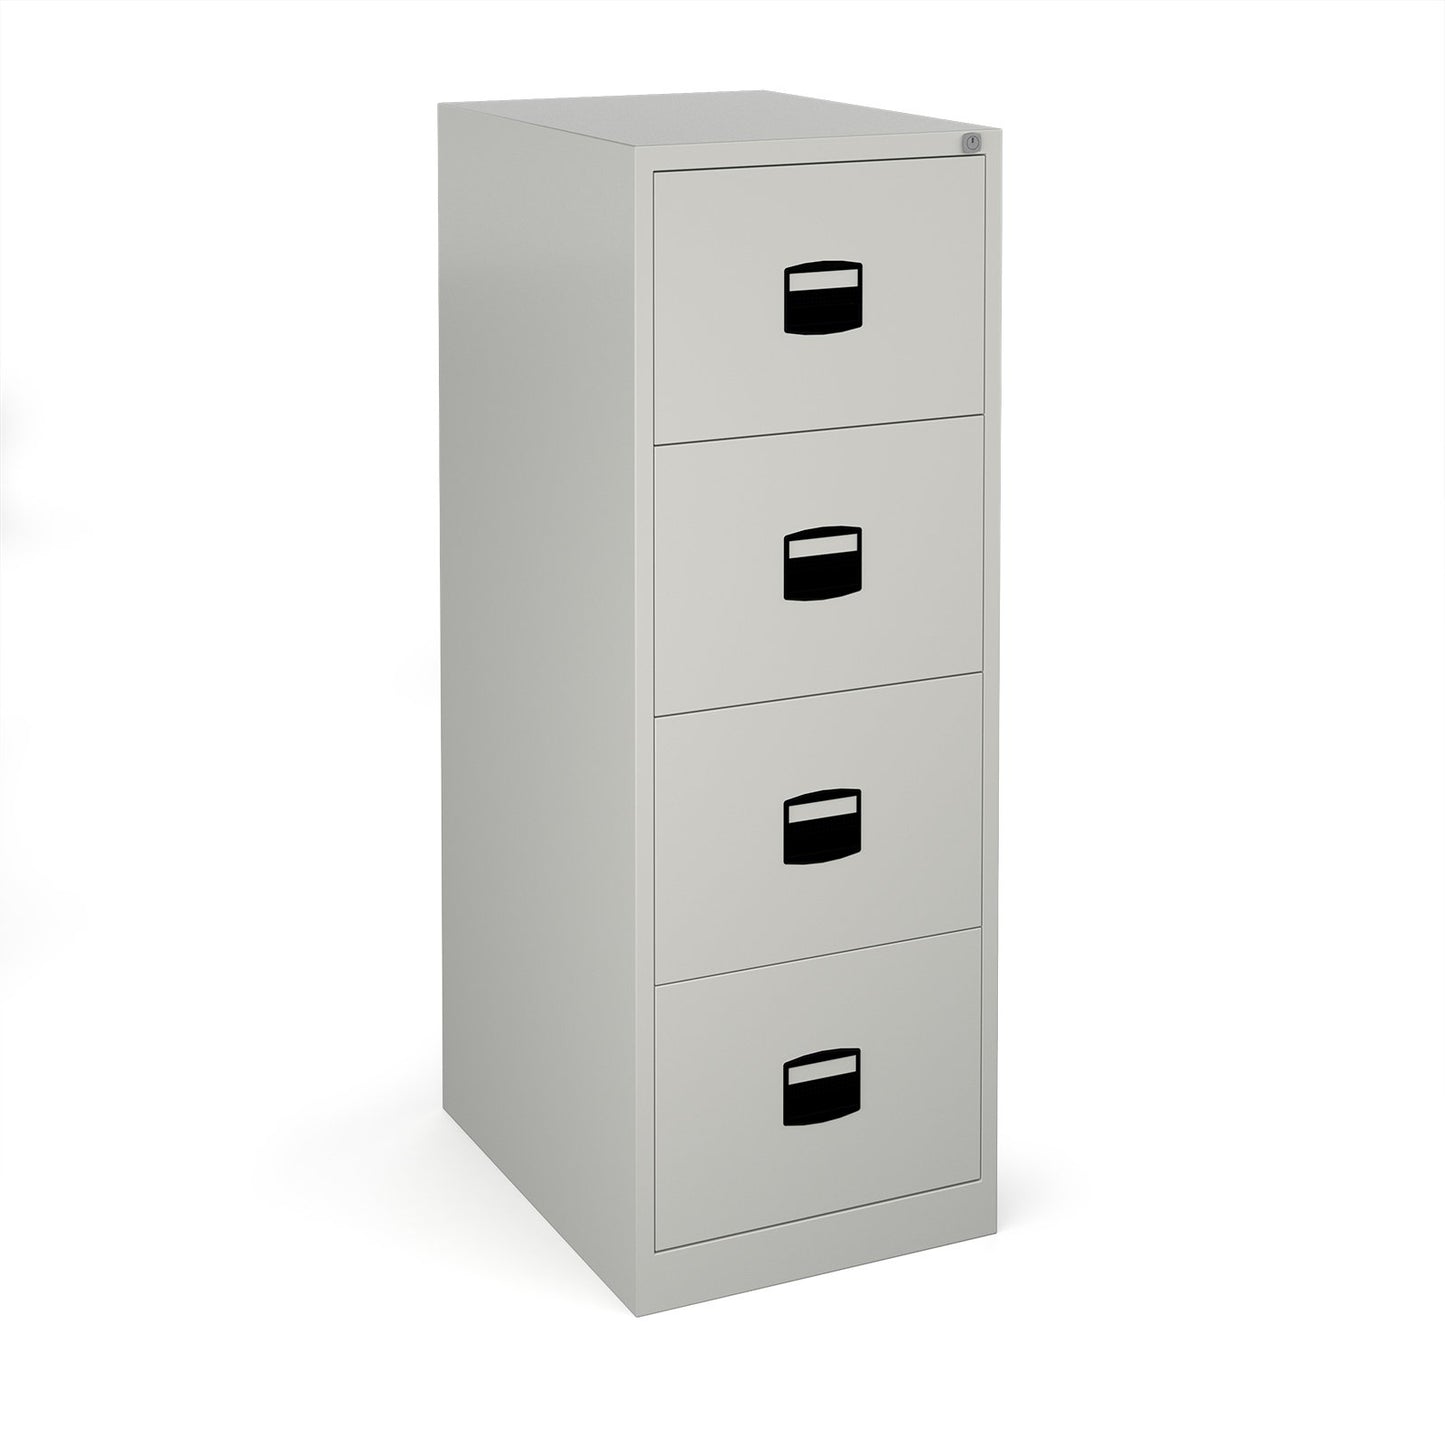 Steel Contract Filing Cabinet - 3 Drawer - Grey